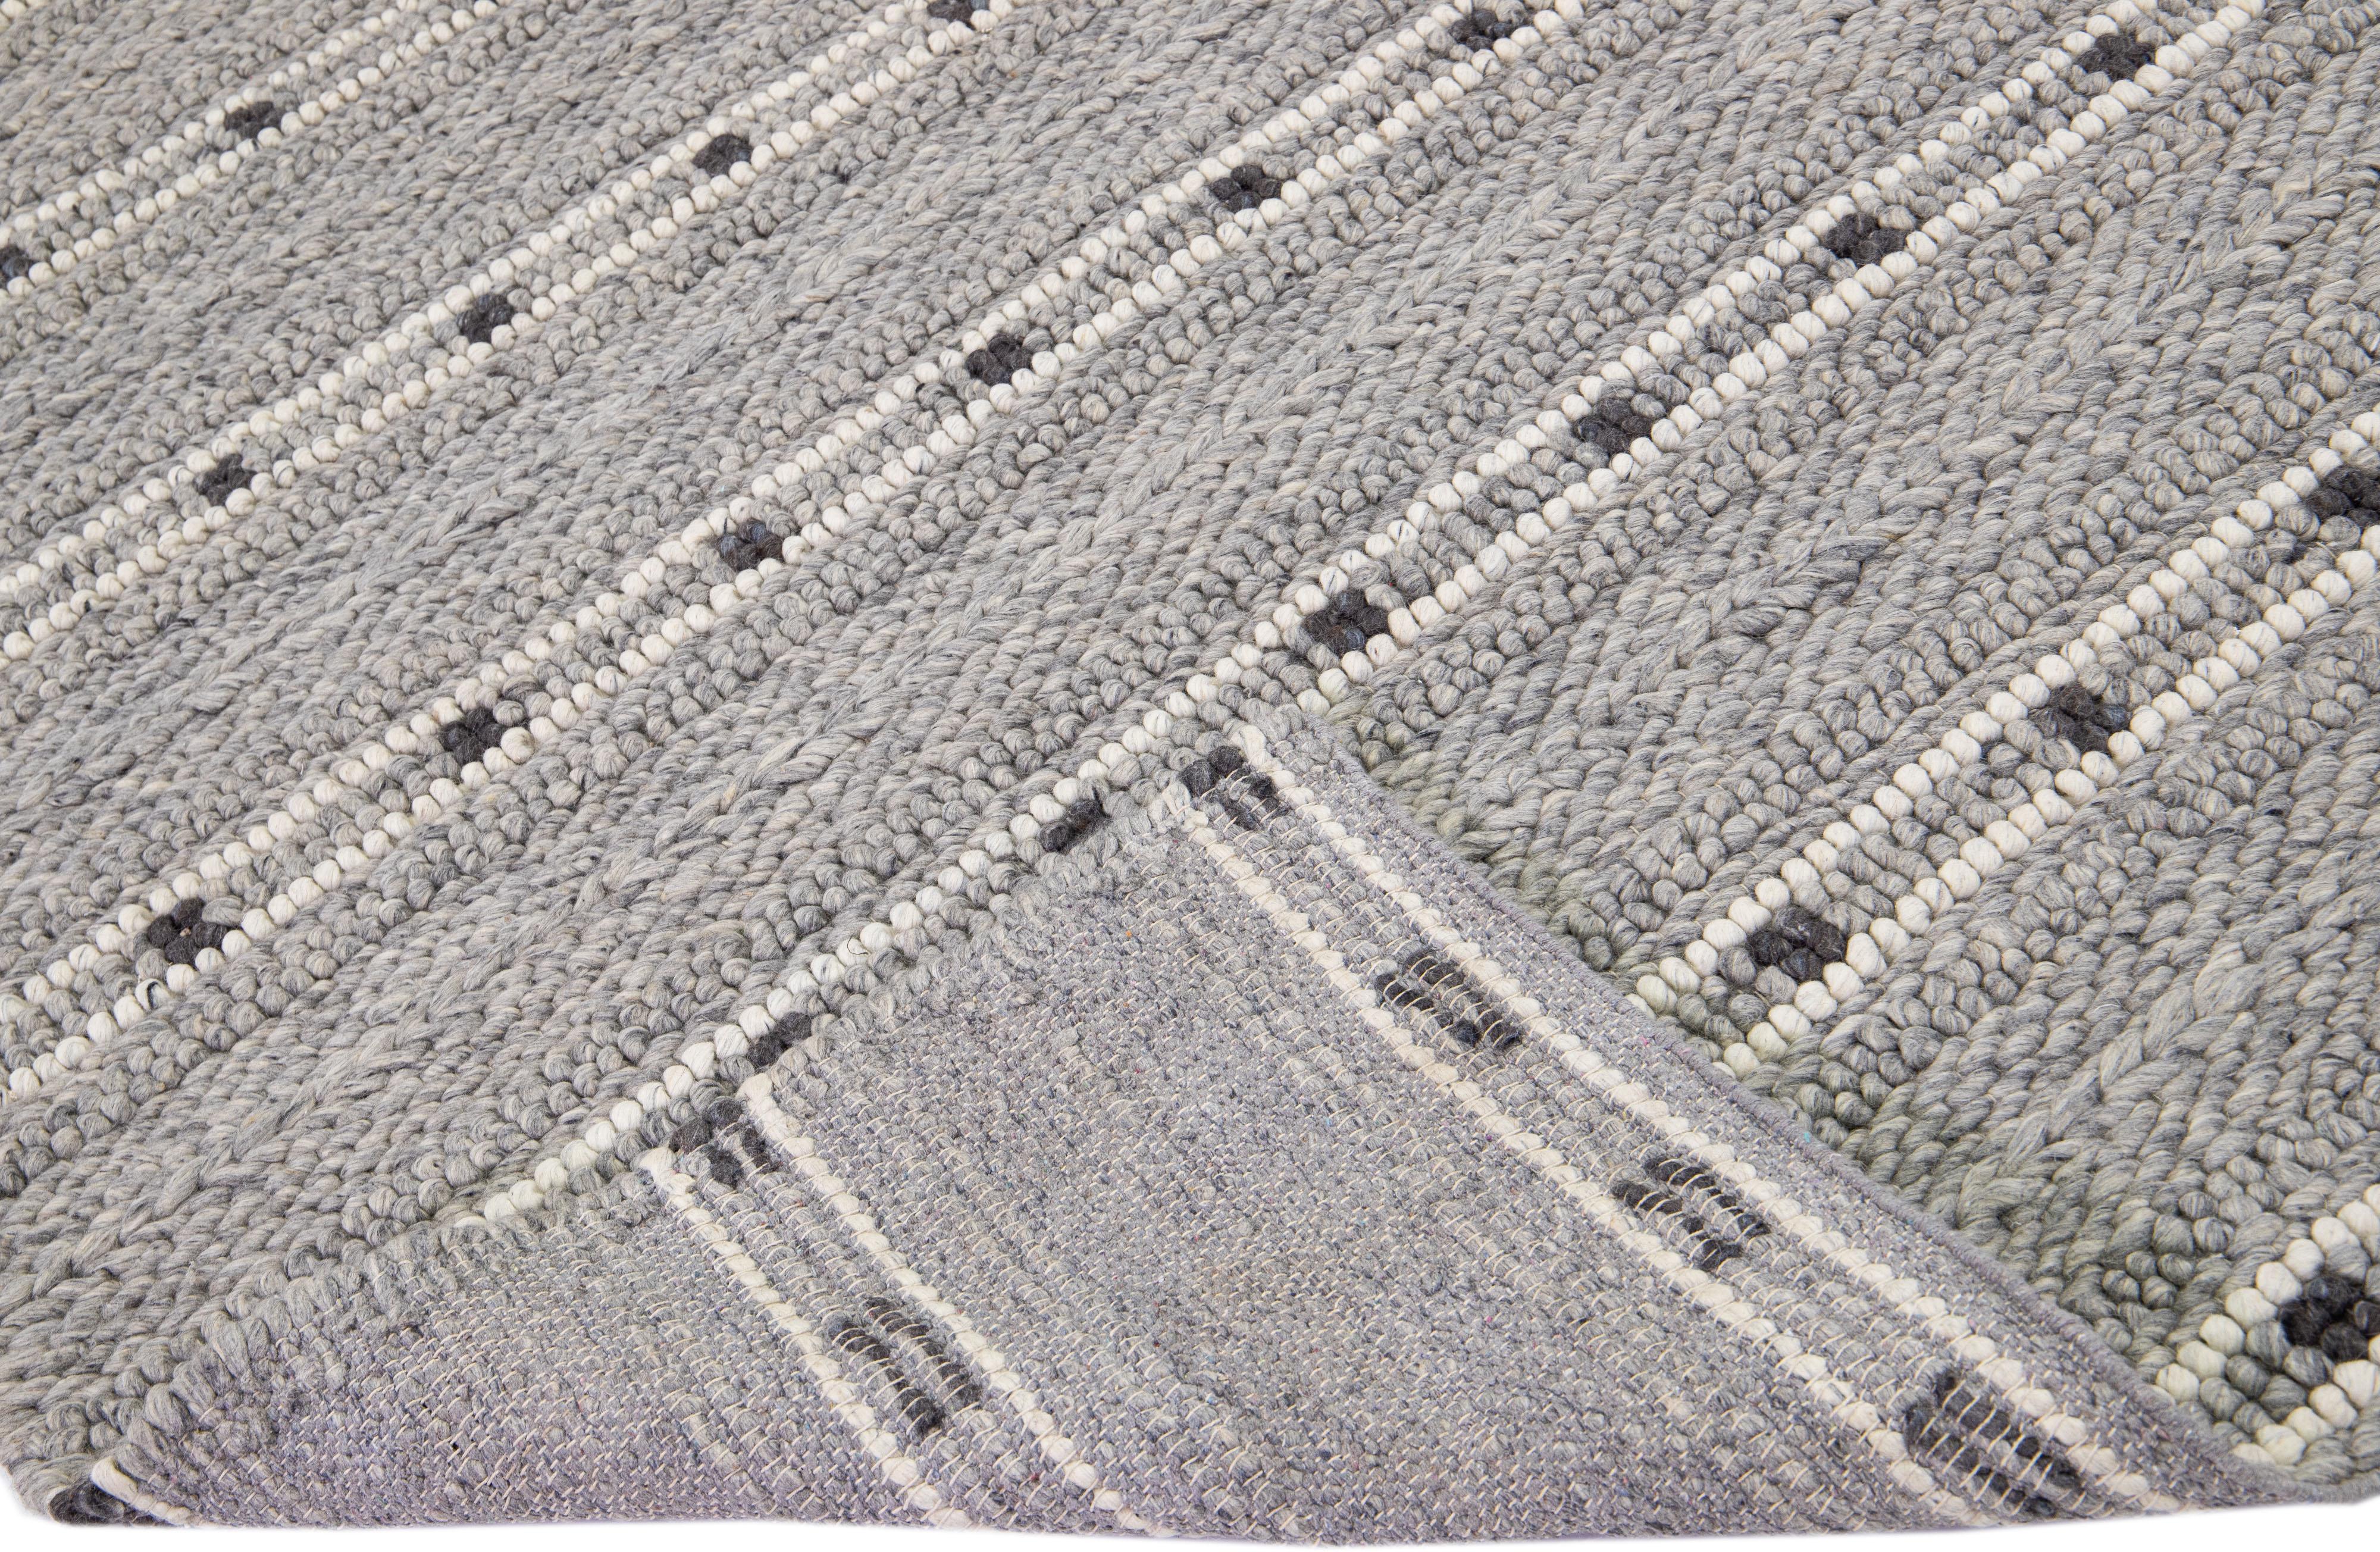 Beautiful Contemporary Thom Filicia Home Collection Rugs. This Indian hand-woven rug is made of wool & viscose and has a gray field and ivory accents all over the design. 
Thom Filicia´s eye for exquisite detailing and beautiful texture shines